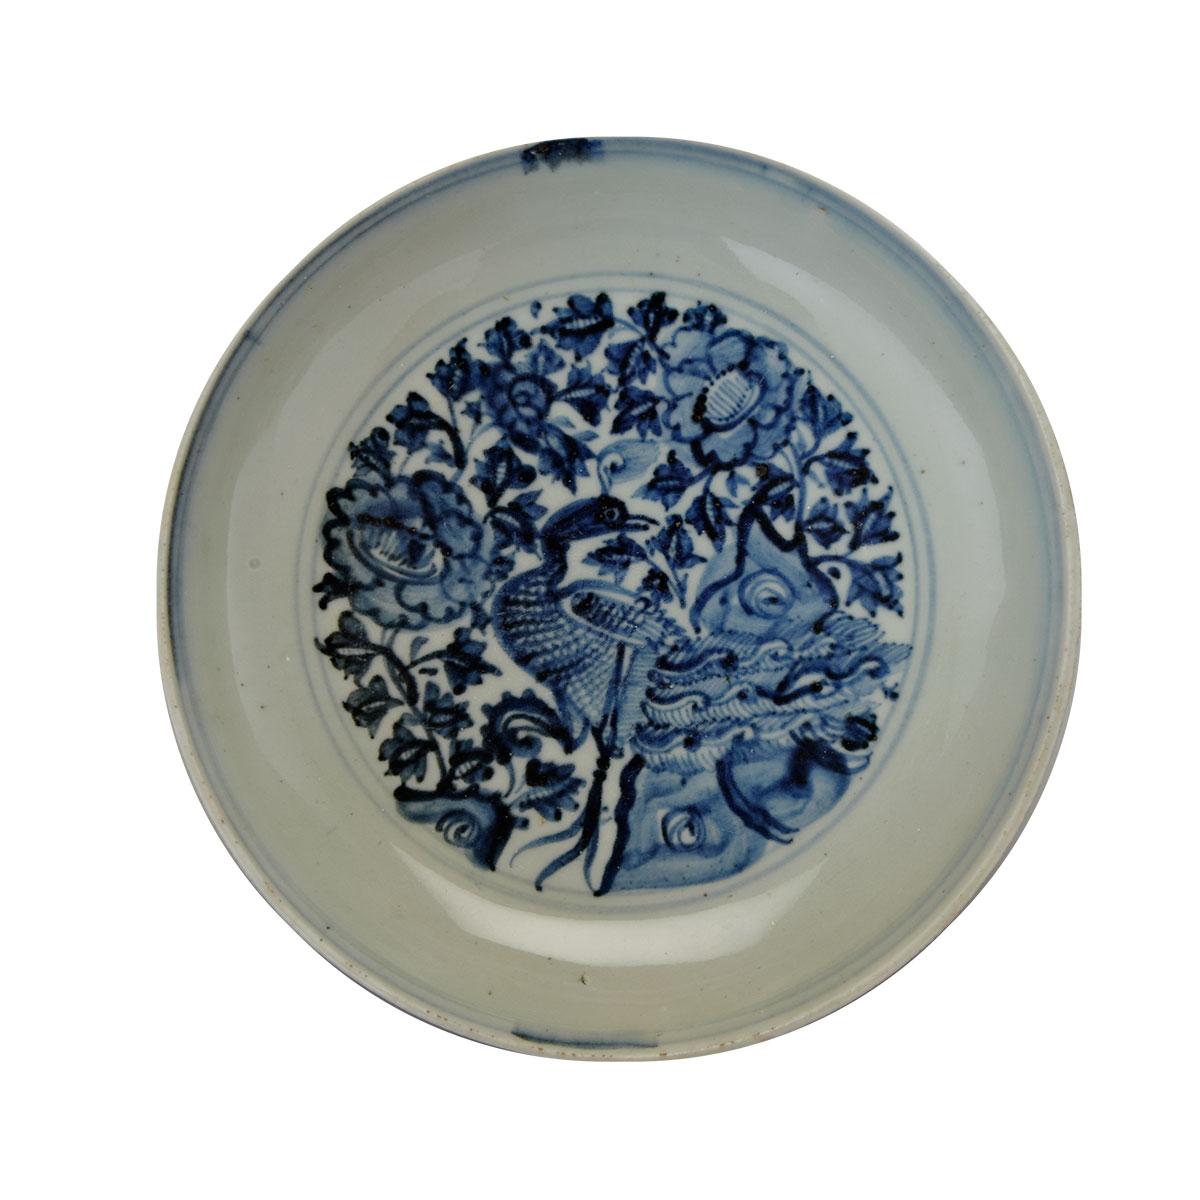 Blue and White Peacock Dish, 15th/16th Century